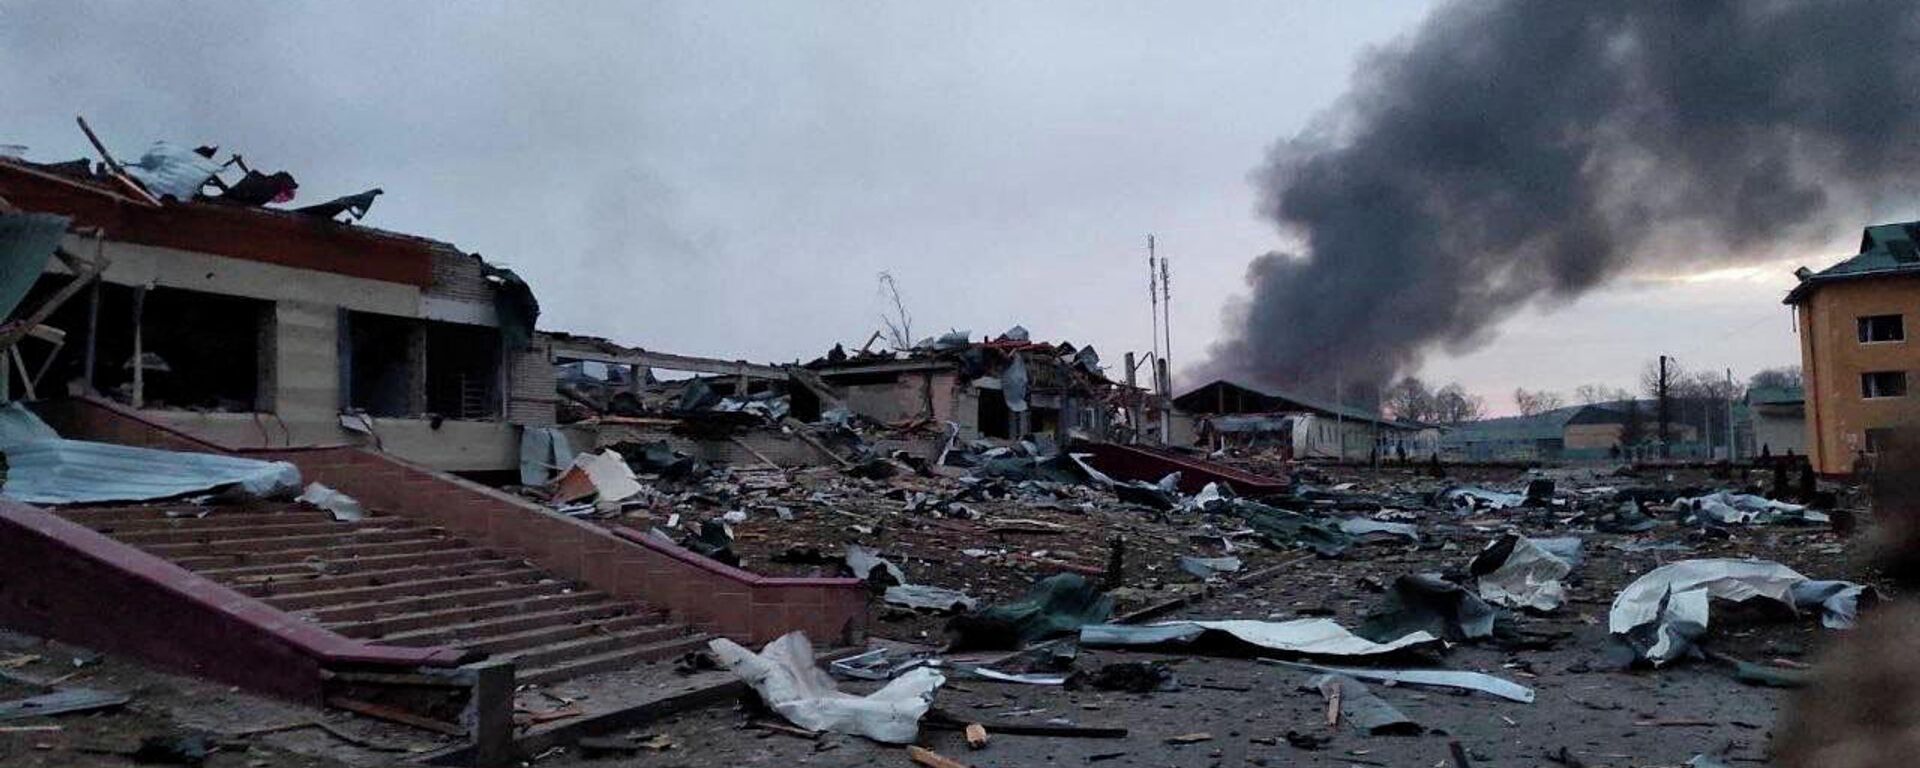 Smoke rises amid damaged buildings following an attack on the Yavorov military base, in Yavorov, Lvov Oblast, Ukraine, March 13, 2022 in this picture obtained from social media. @BackAndAlive/via REUTERS  THIS IMAGE HAS BEEN SUPPLIED BY A THIRD PARTY. MANDATORY CREDIT. NO RESALES. NO ARCHIVES. - Sputnik International, 1920, 15.03.2022